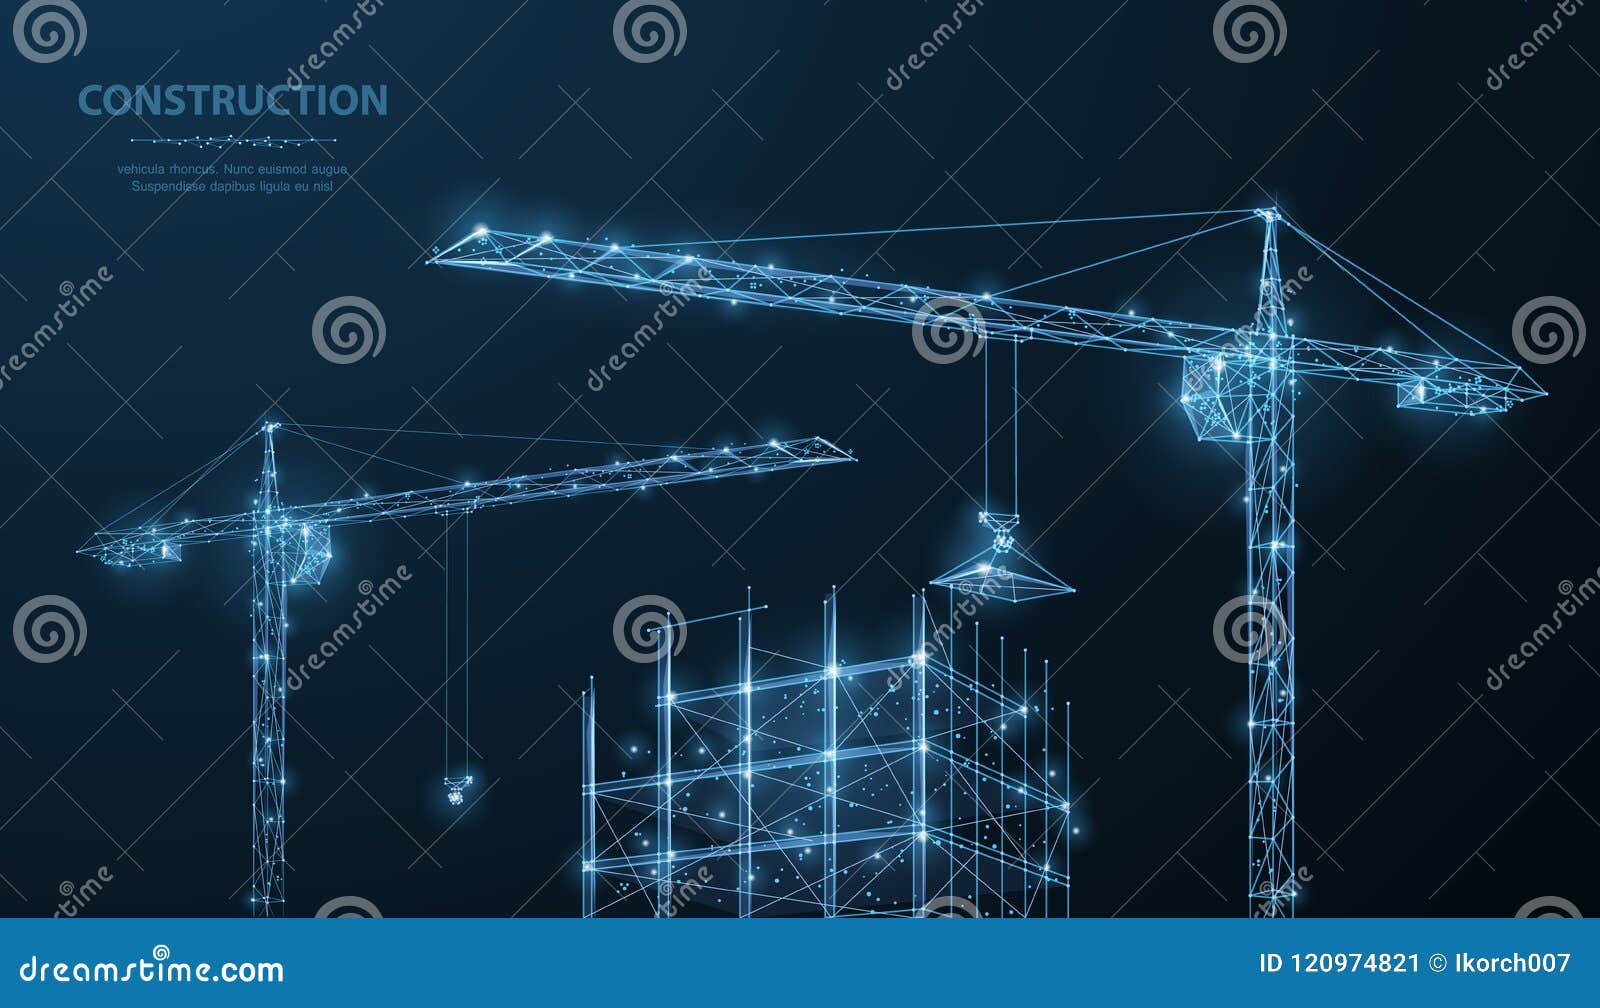 construction. polygonal wireframe building under crune on dark blue night sky with dots, stars.